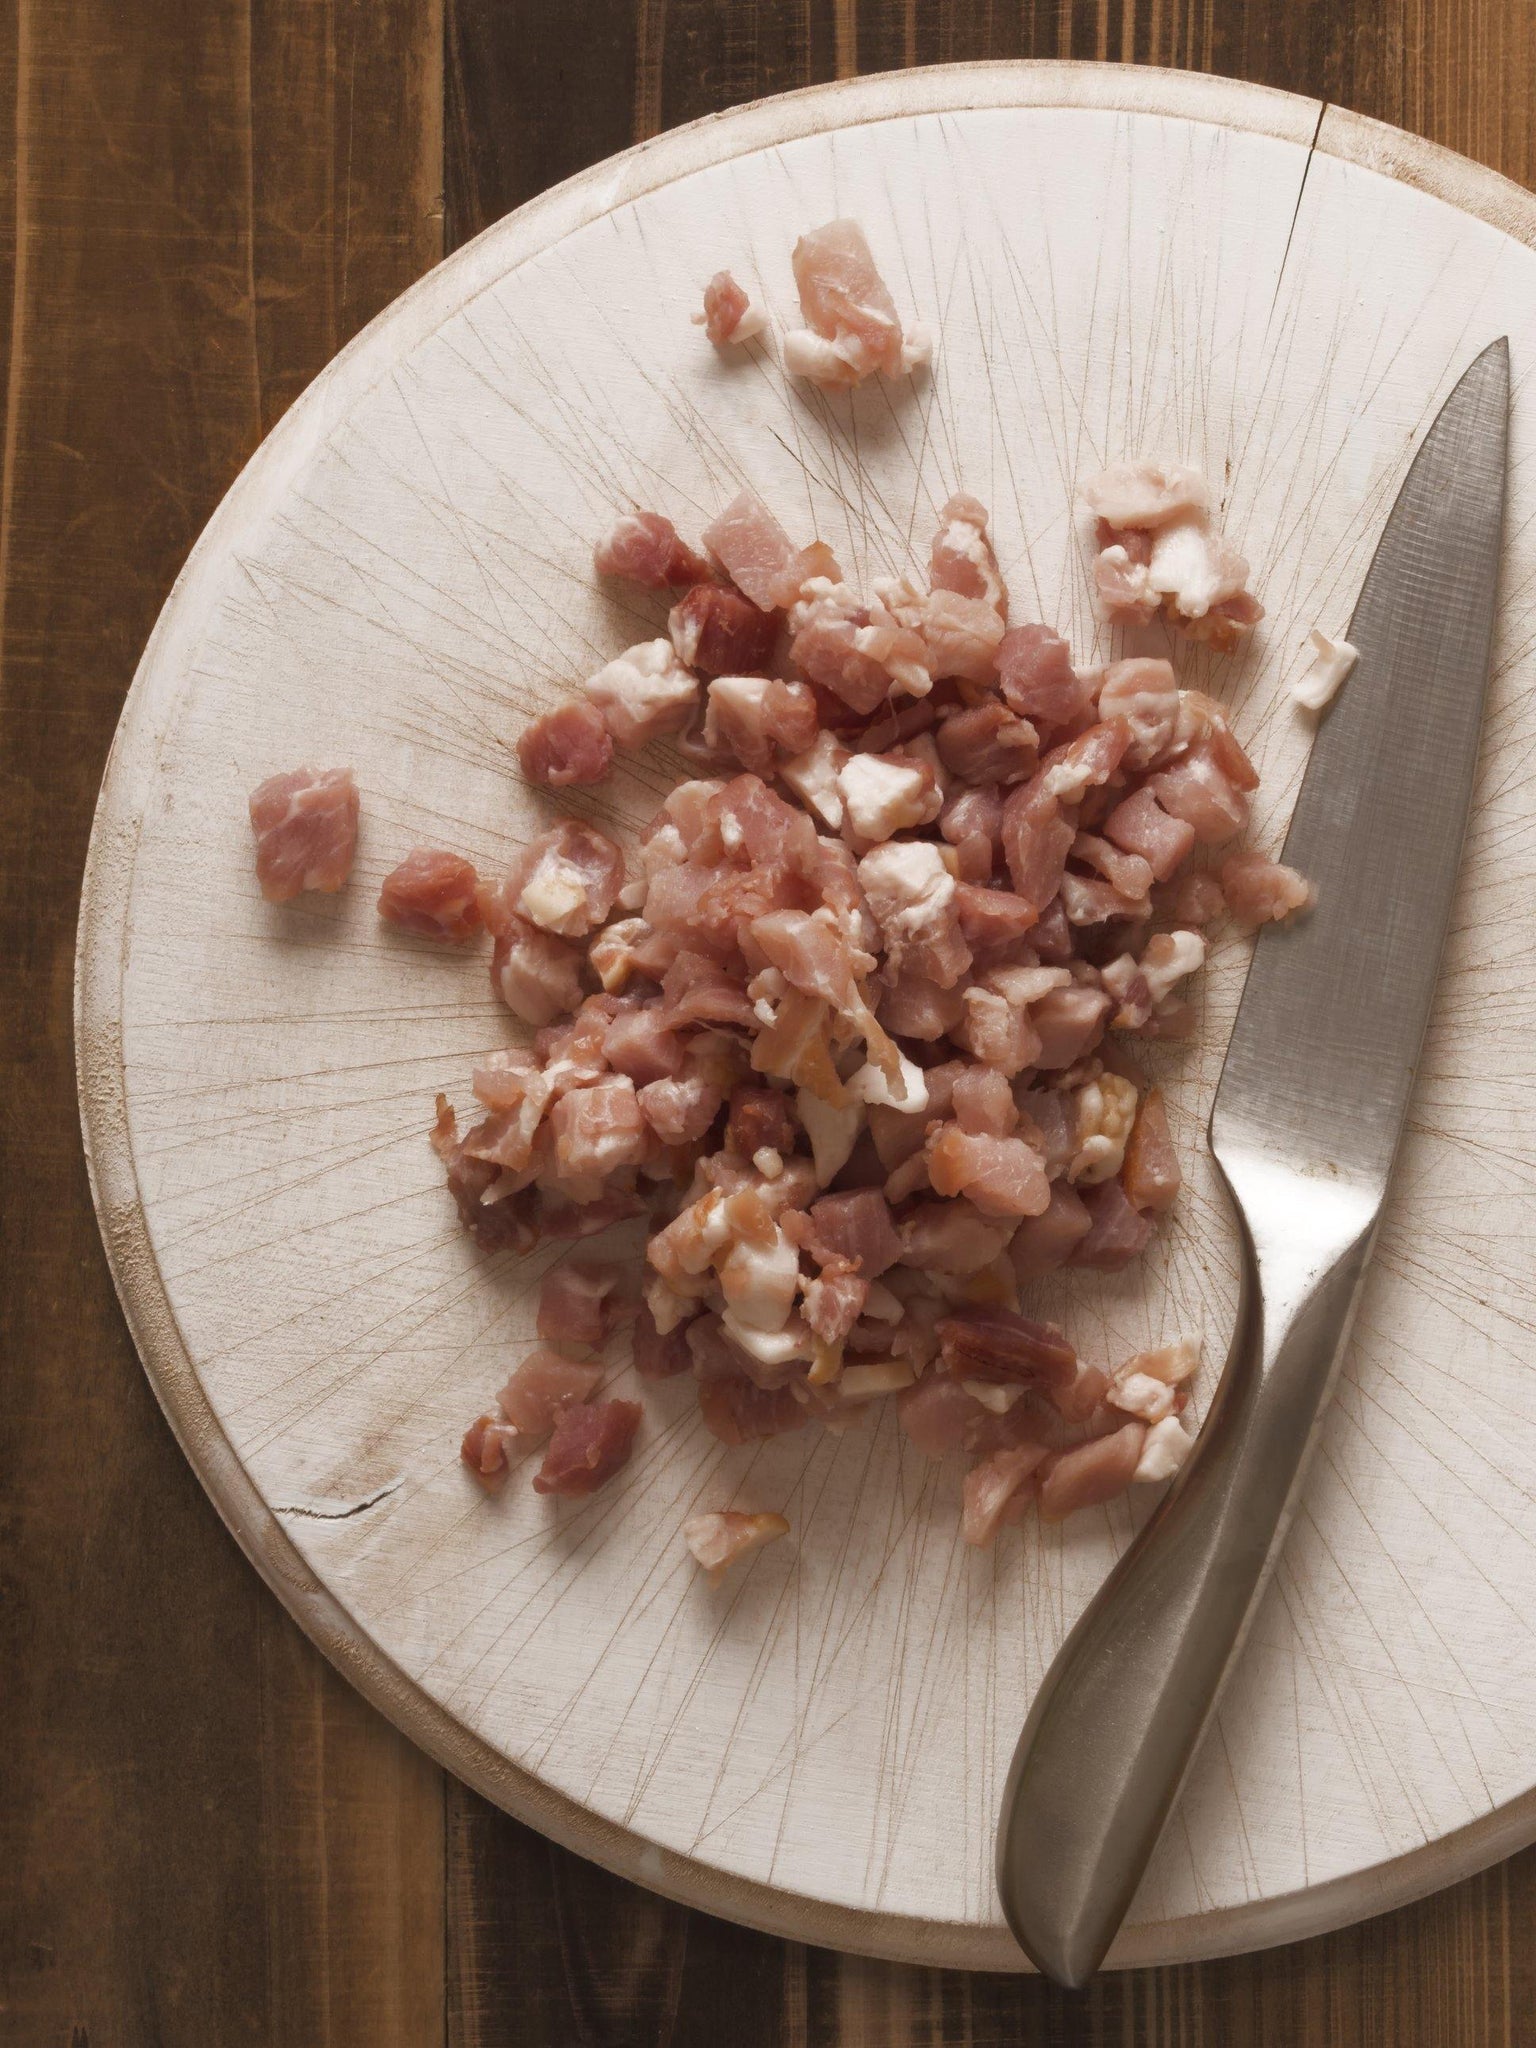 Diced Goat Bacon ( Diced Goat Belly)